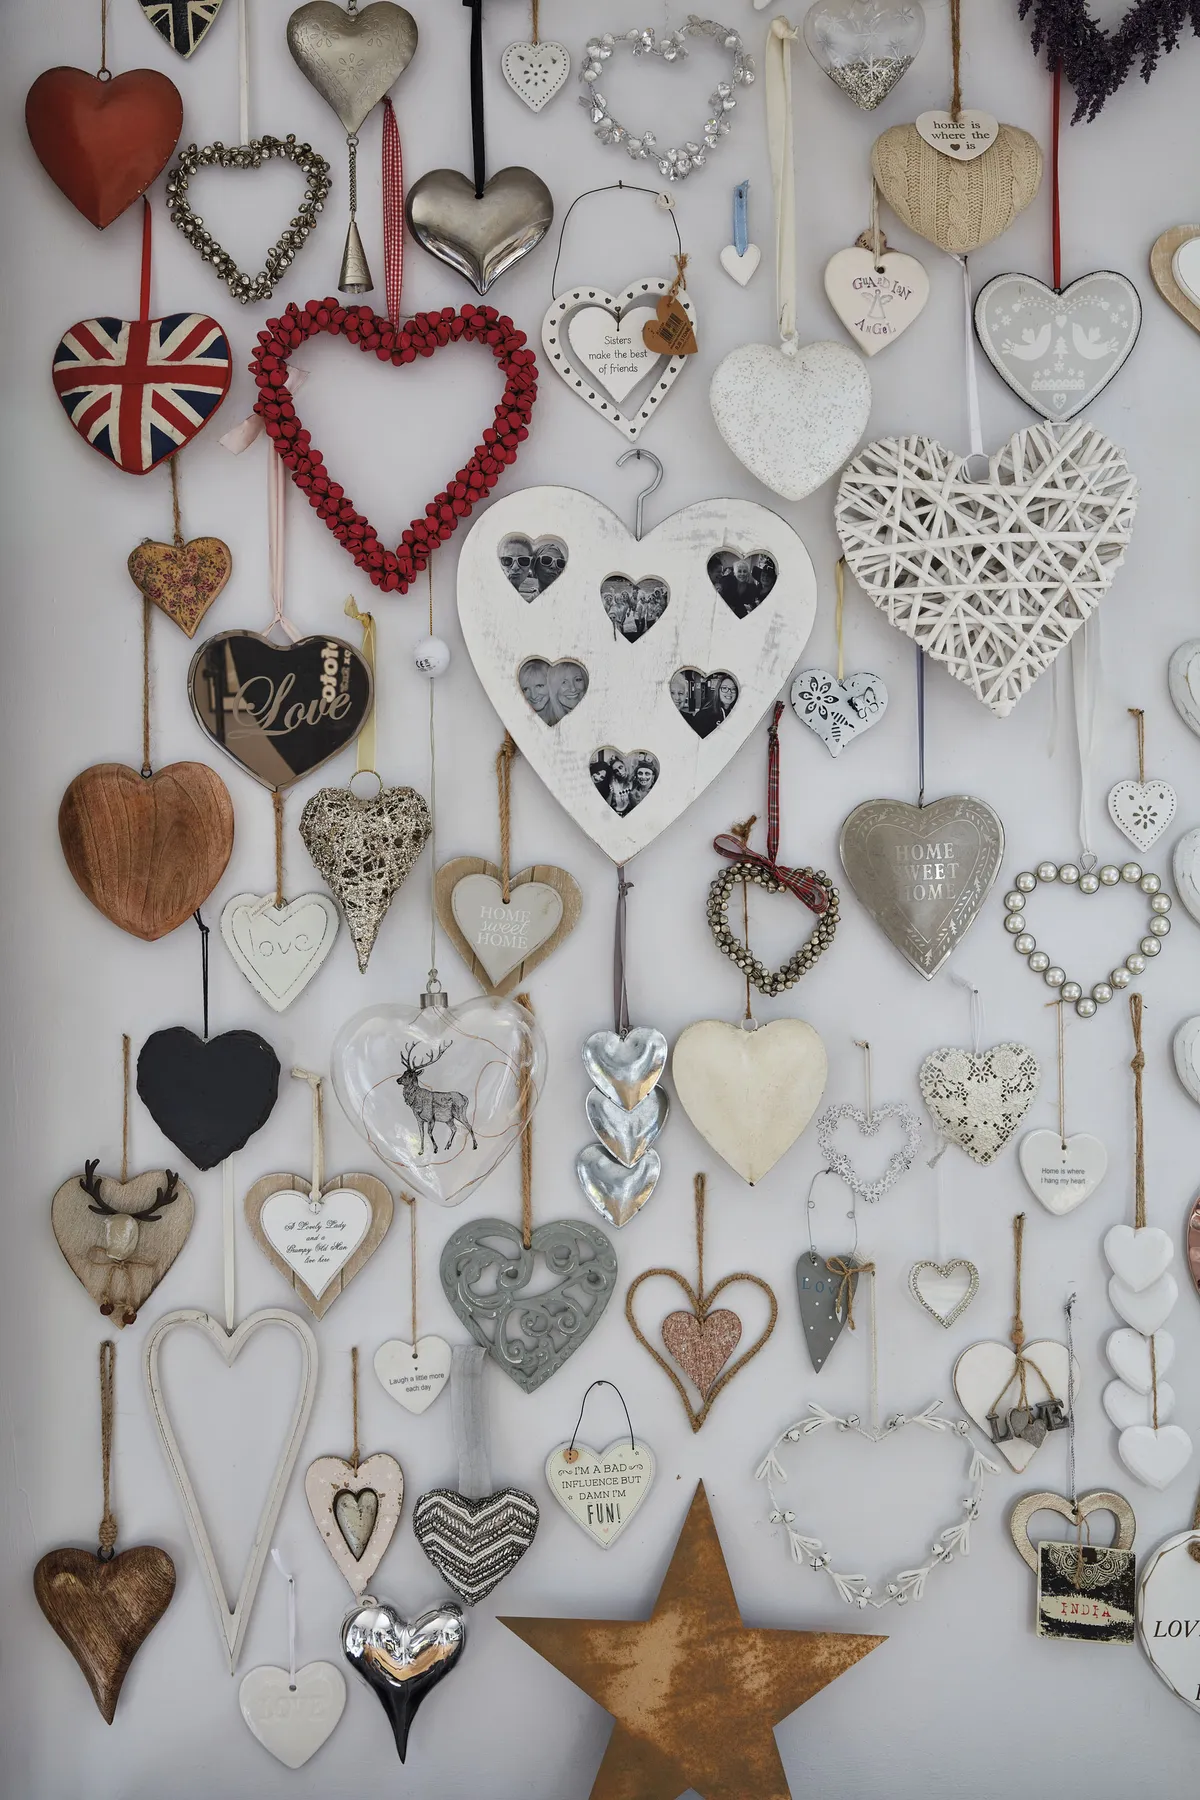 Start your own collection of hanging hearts to give your walls some country styling